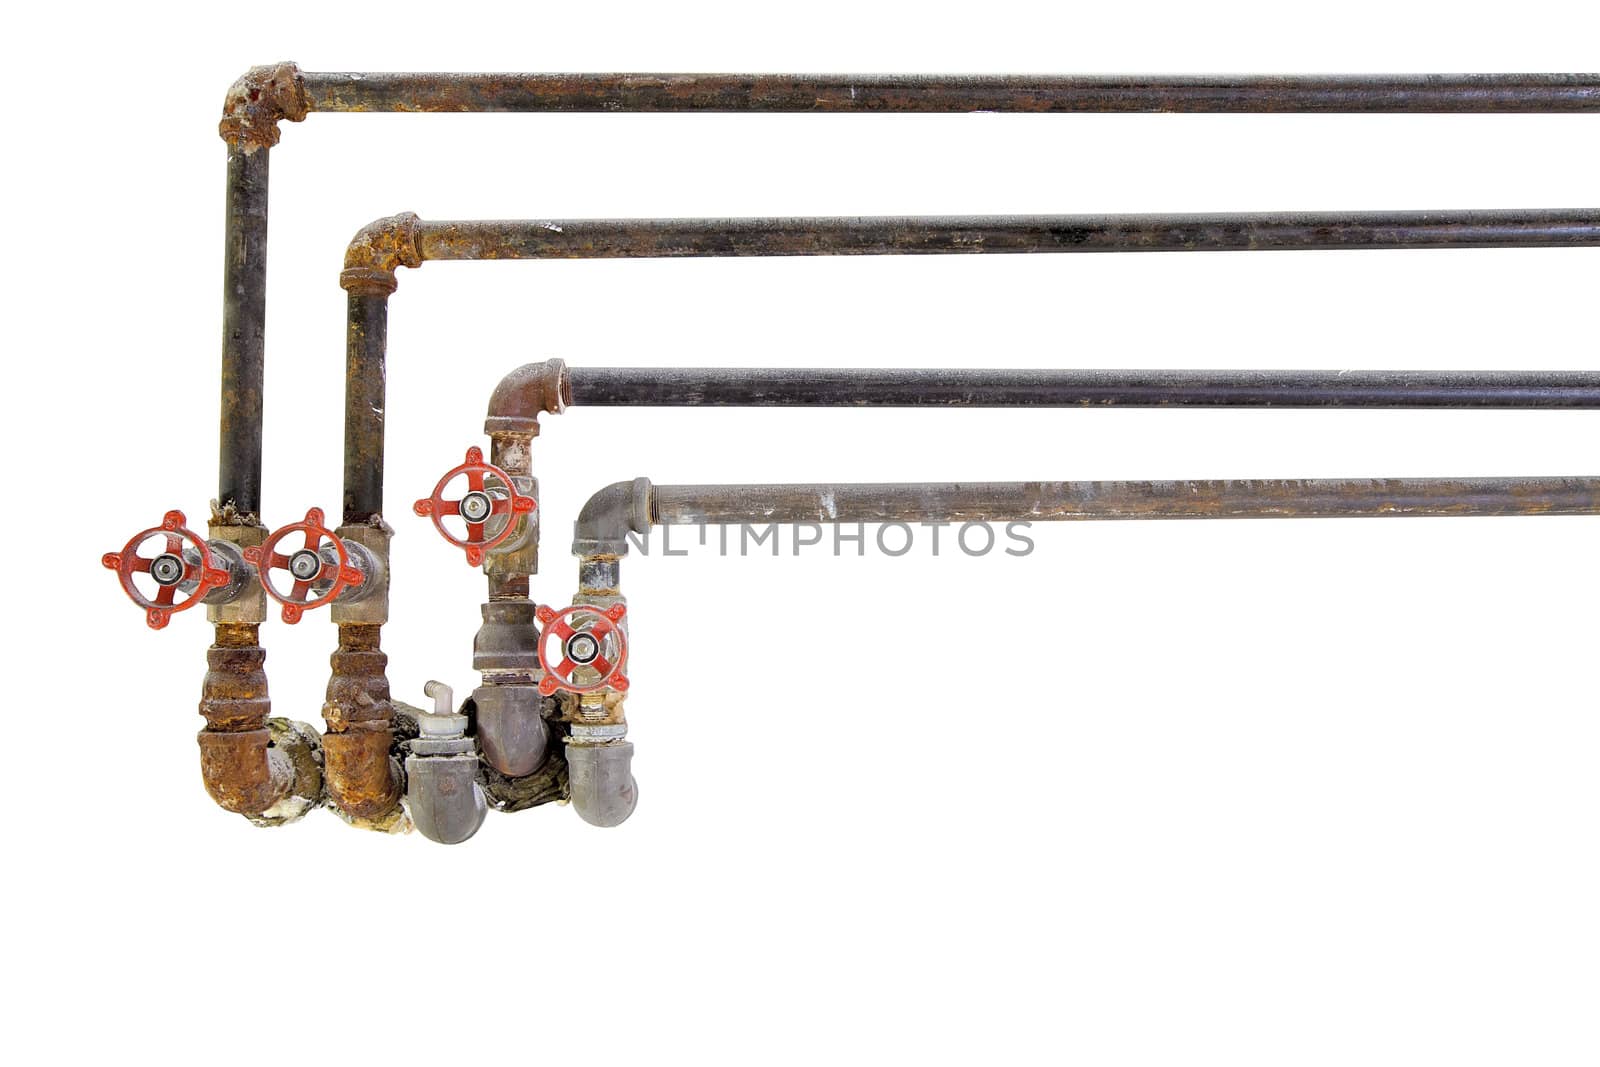 Old Plumbing Pipes with Valves by jpldesigns